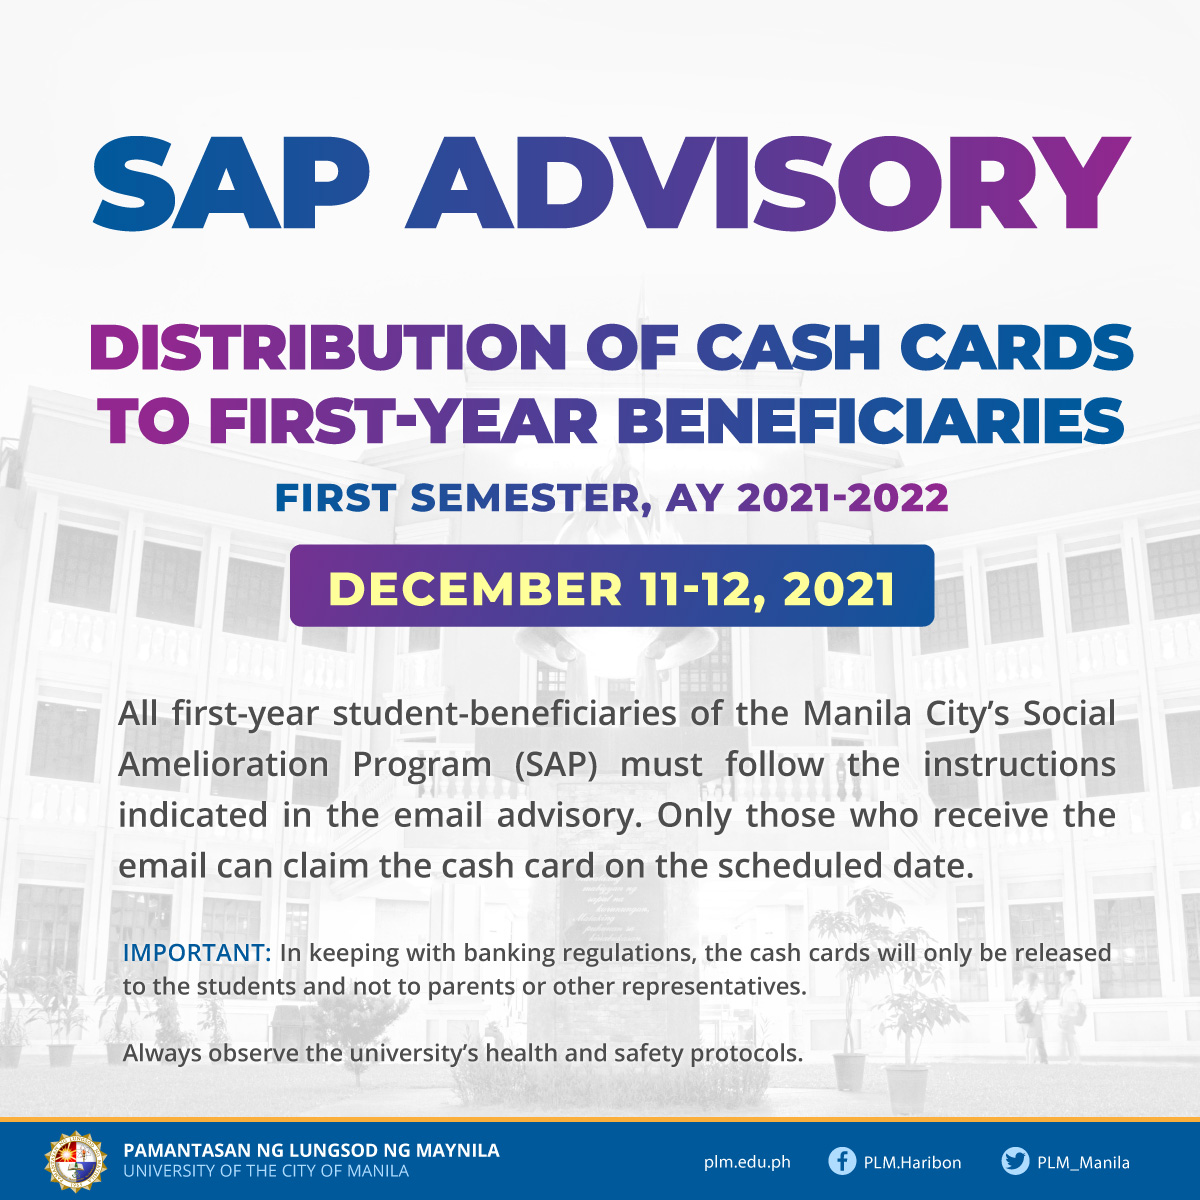 PLM to distribute cash cards for 1st year beneficiaries of SAP